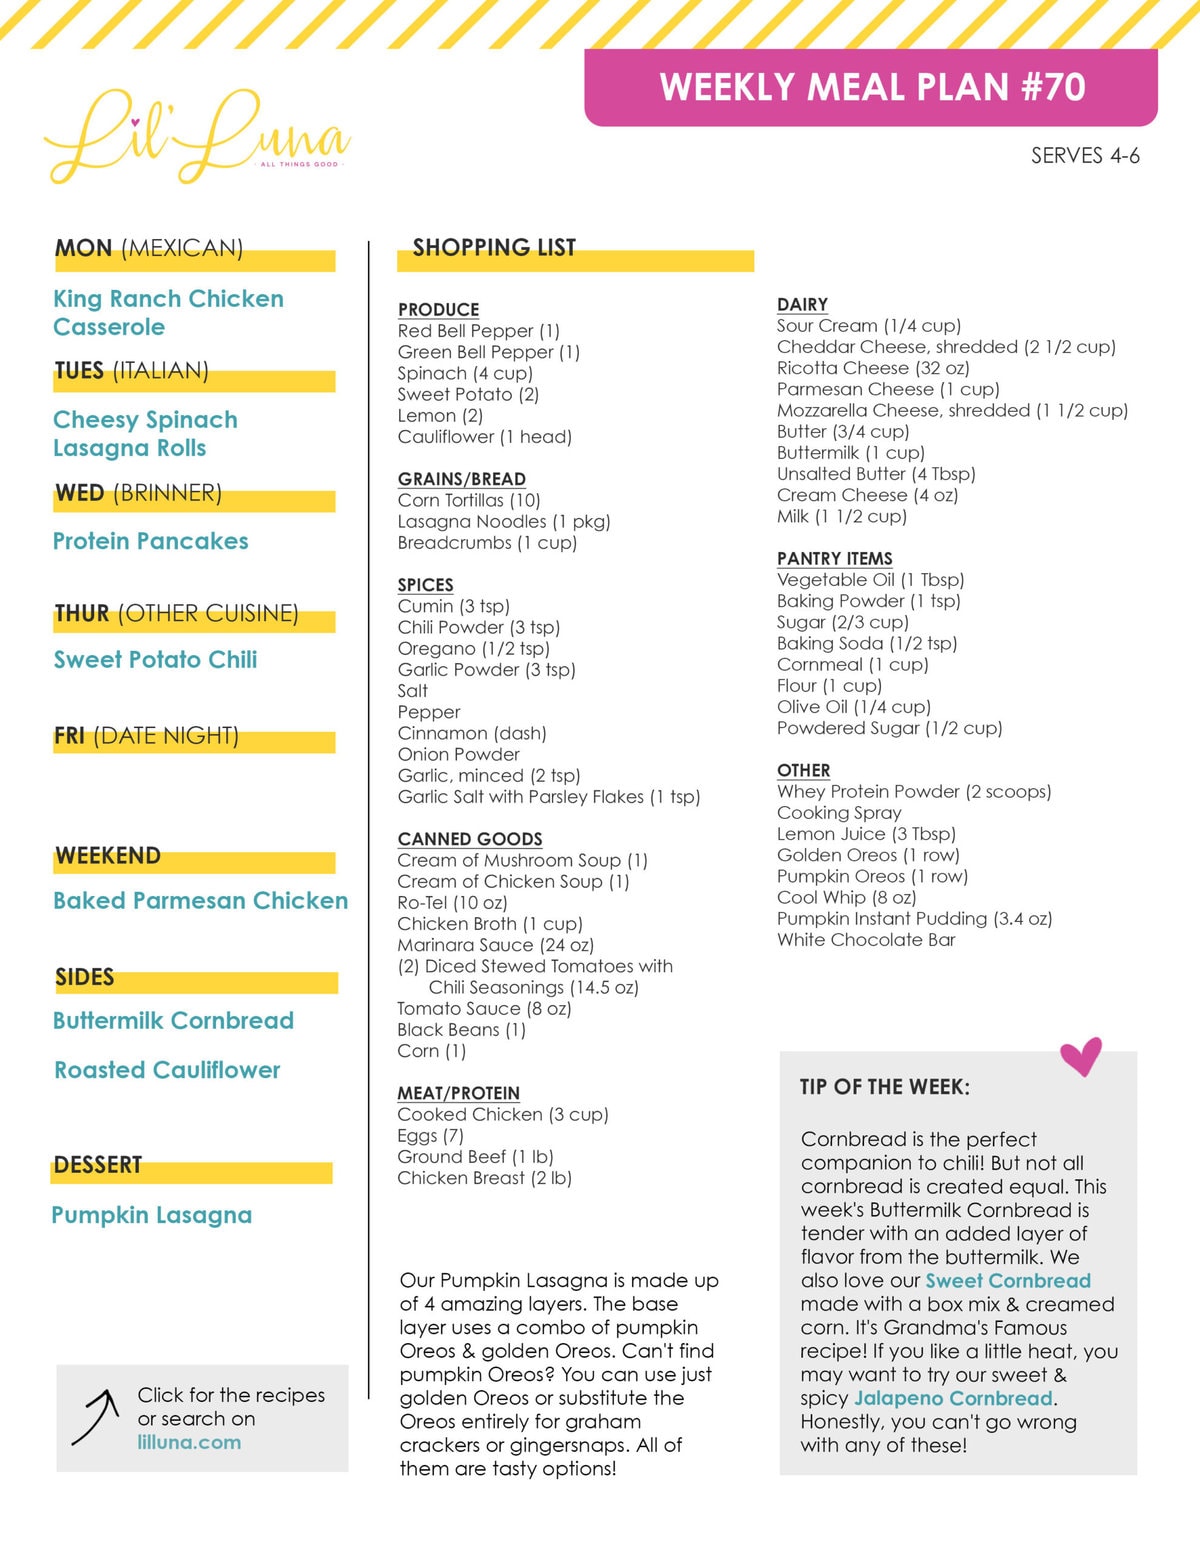 Printable version of Meal Plan #70 with grocery list.